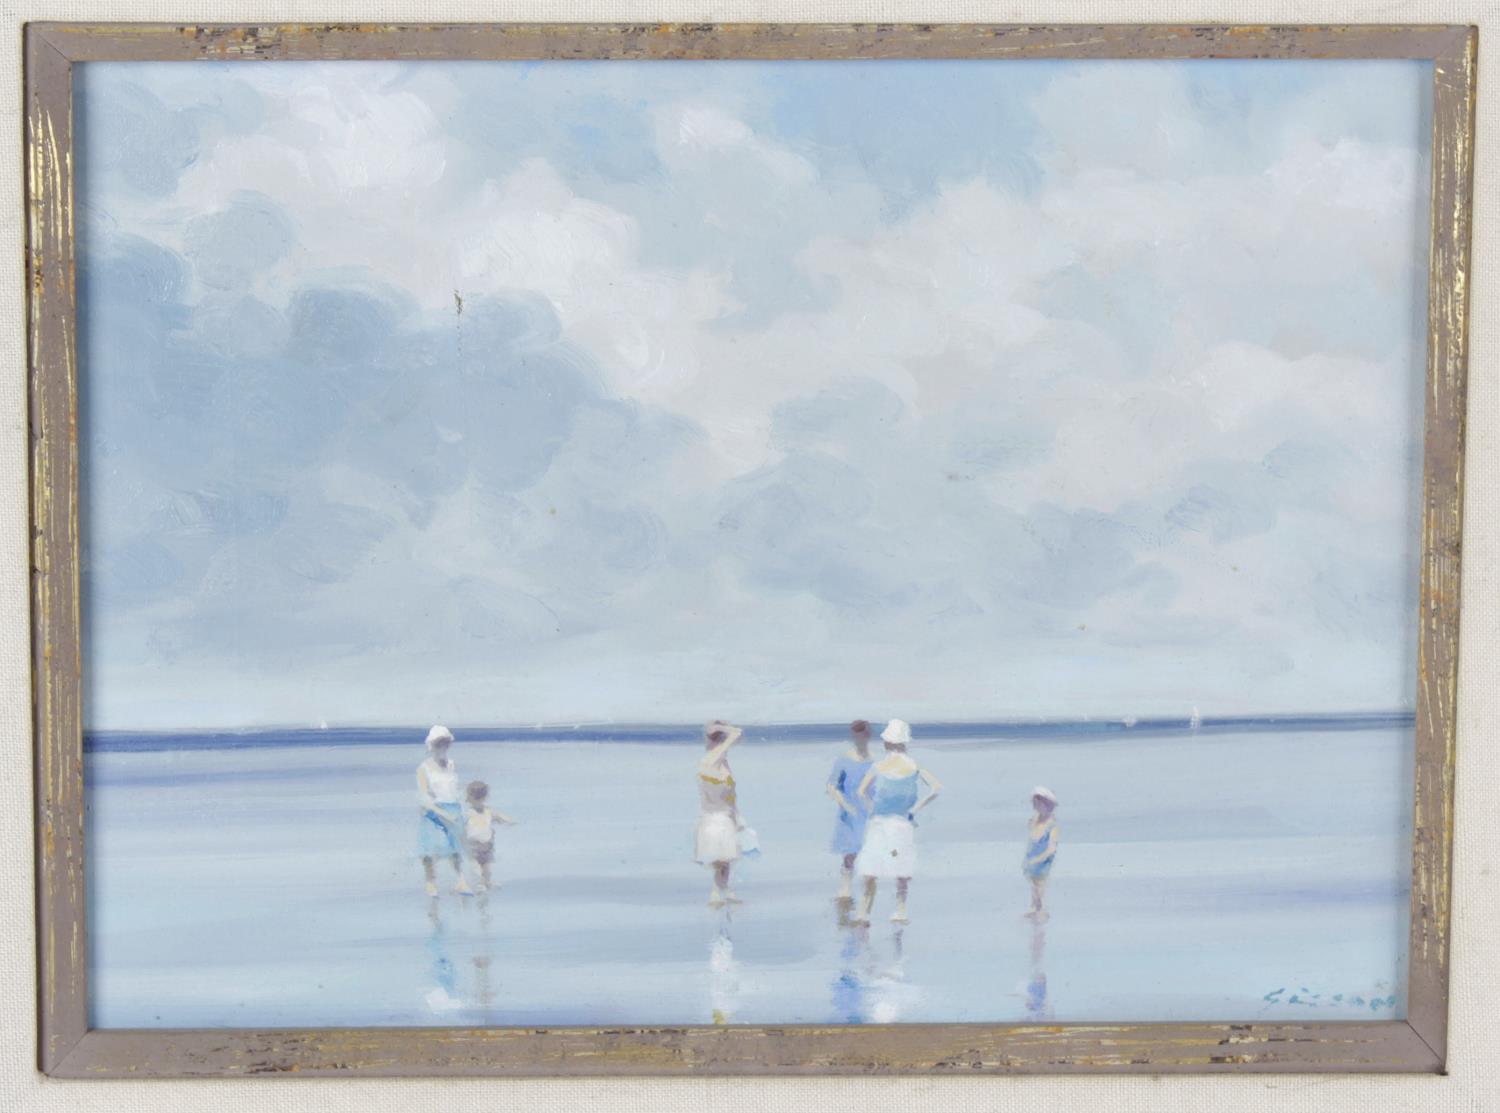 An oil on canvas, depicting beach-goers at low tide, against a horizon speckled with sailing boats